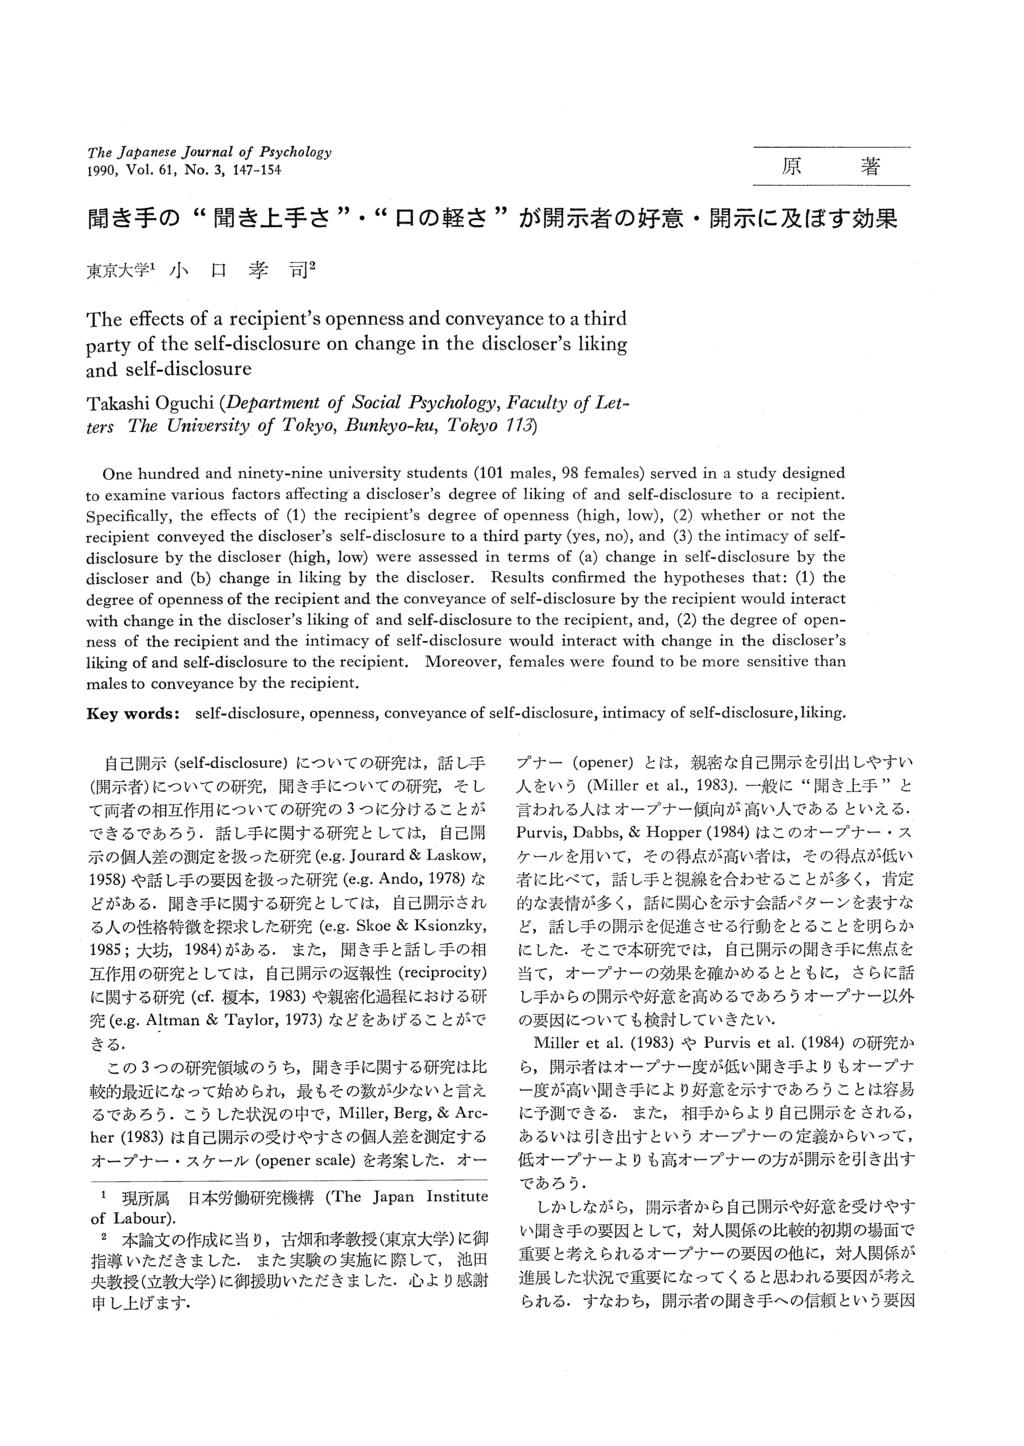 The Japanese Journal of Psychology 1990, Vol. 61, No.